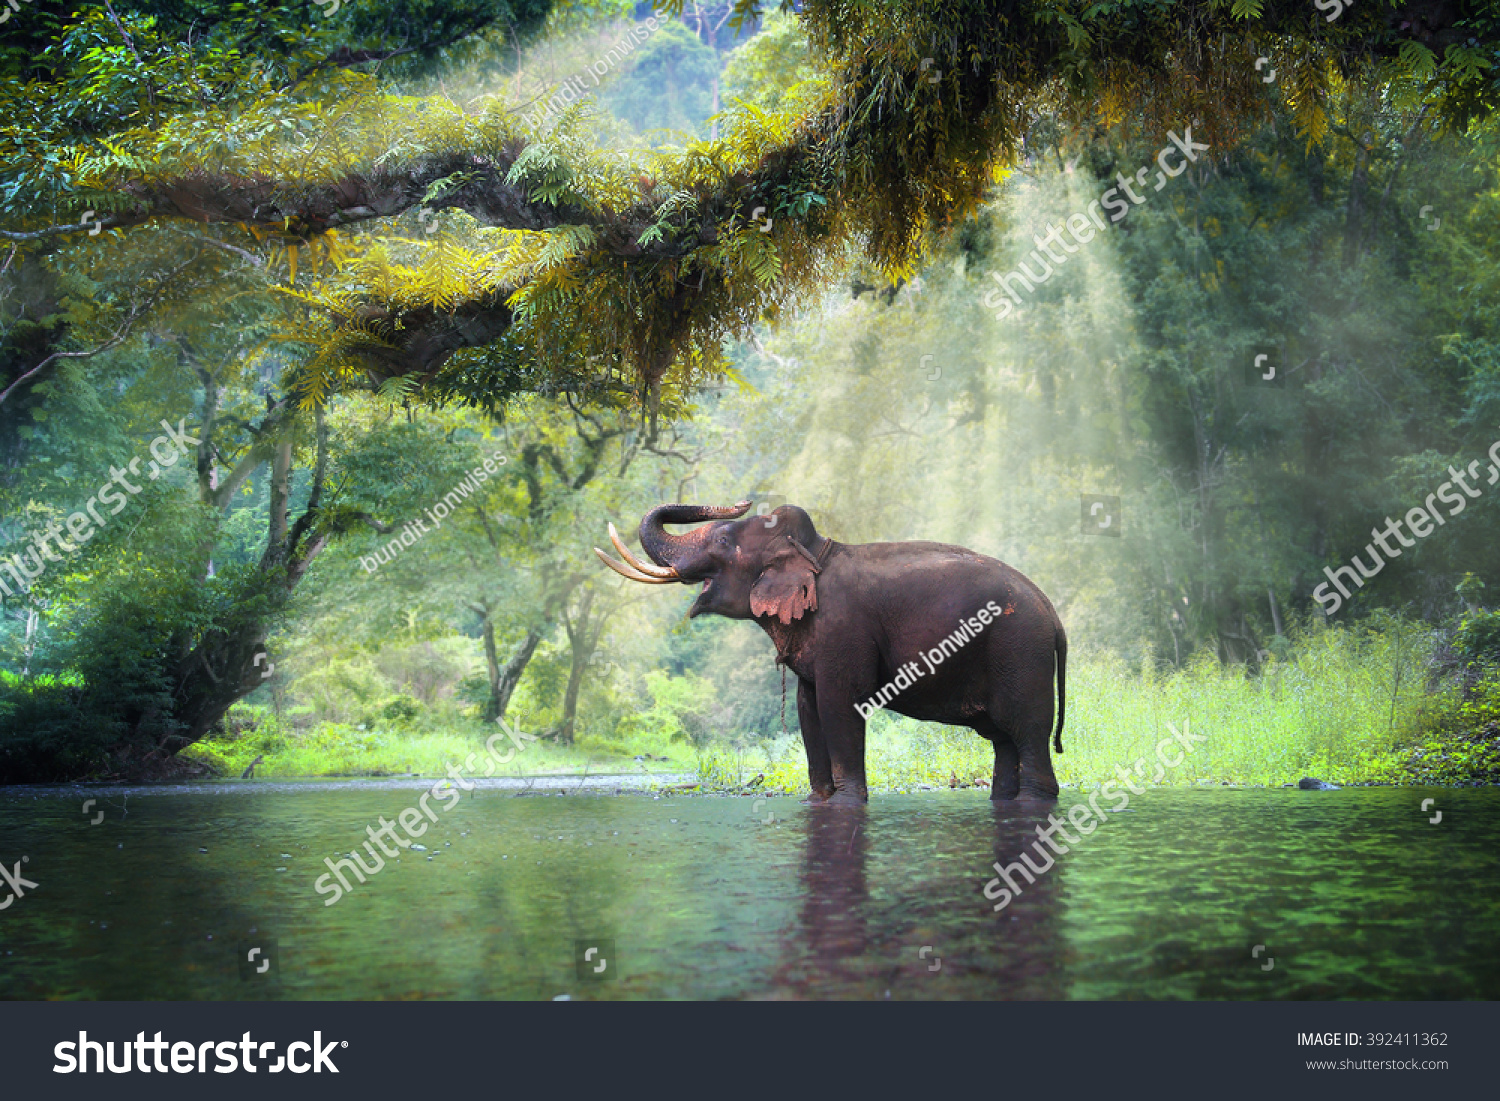 Wild elephant in the beautiful forest at Kanchanaburi province in Thailand, (with clipping path) #392411362